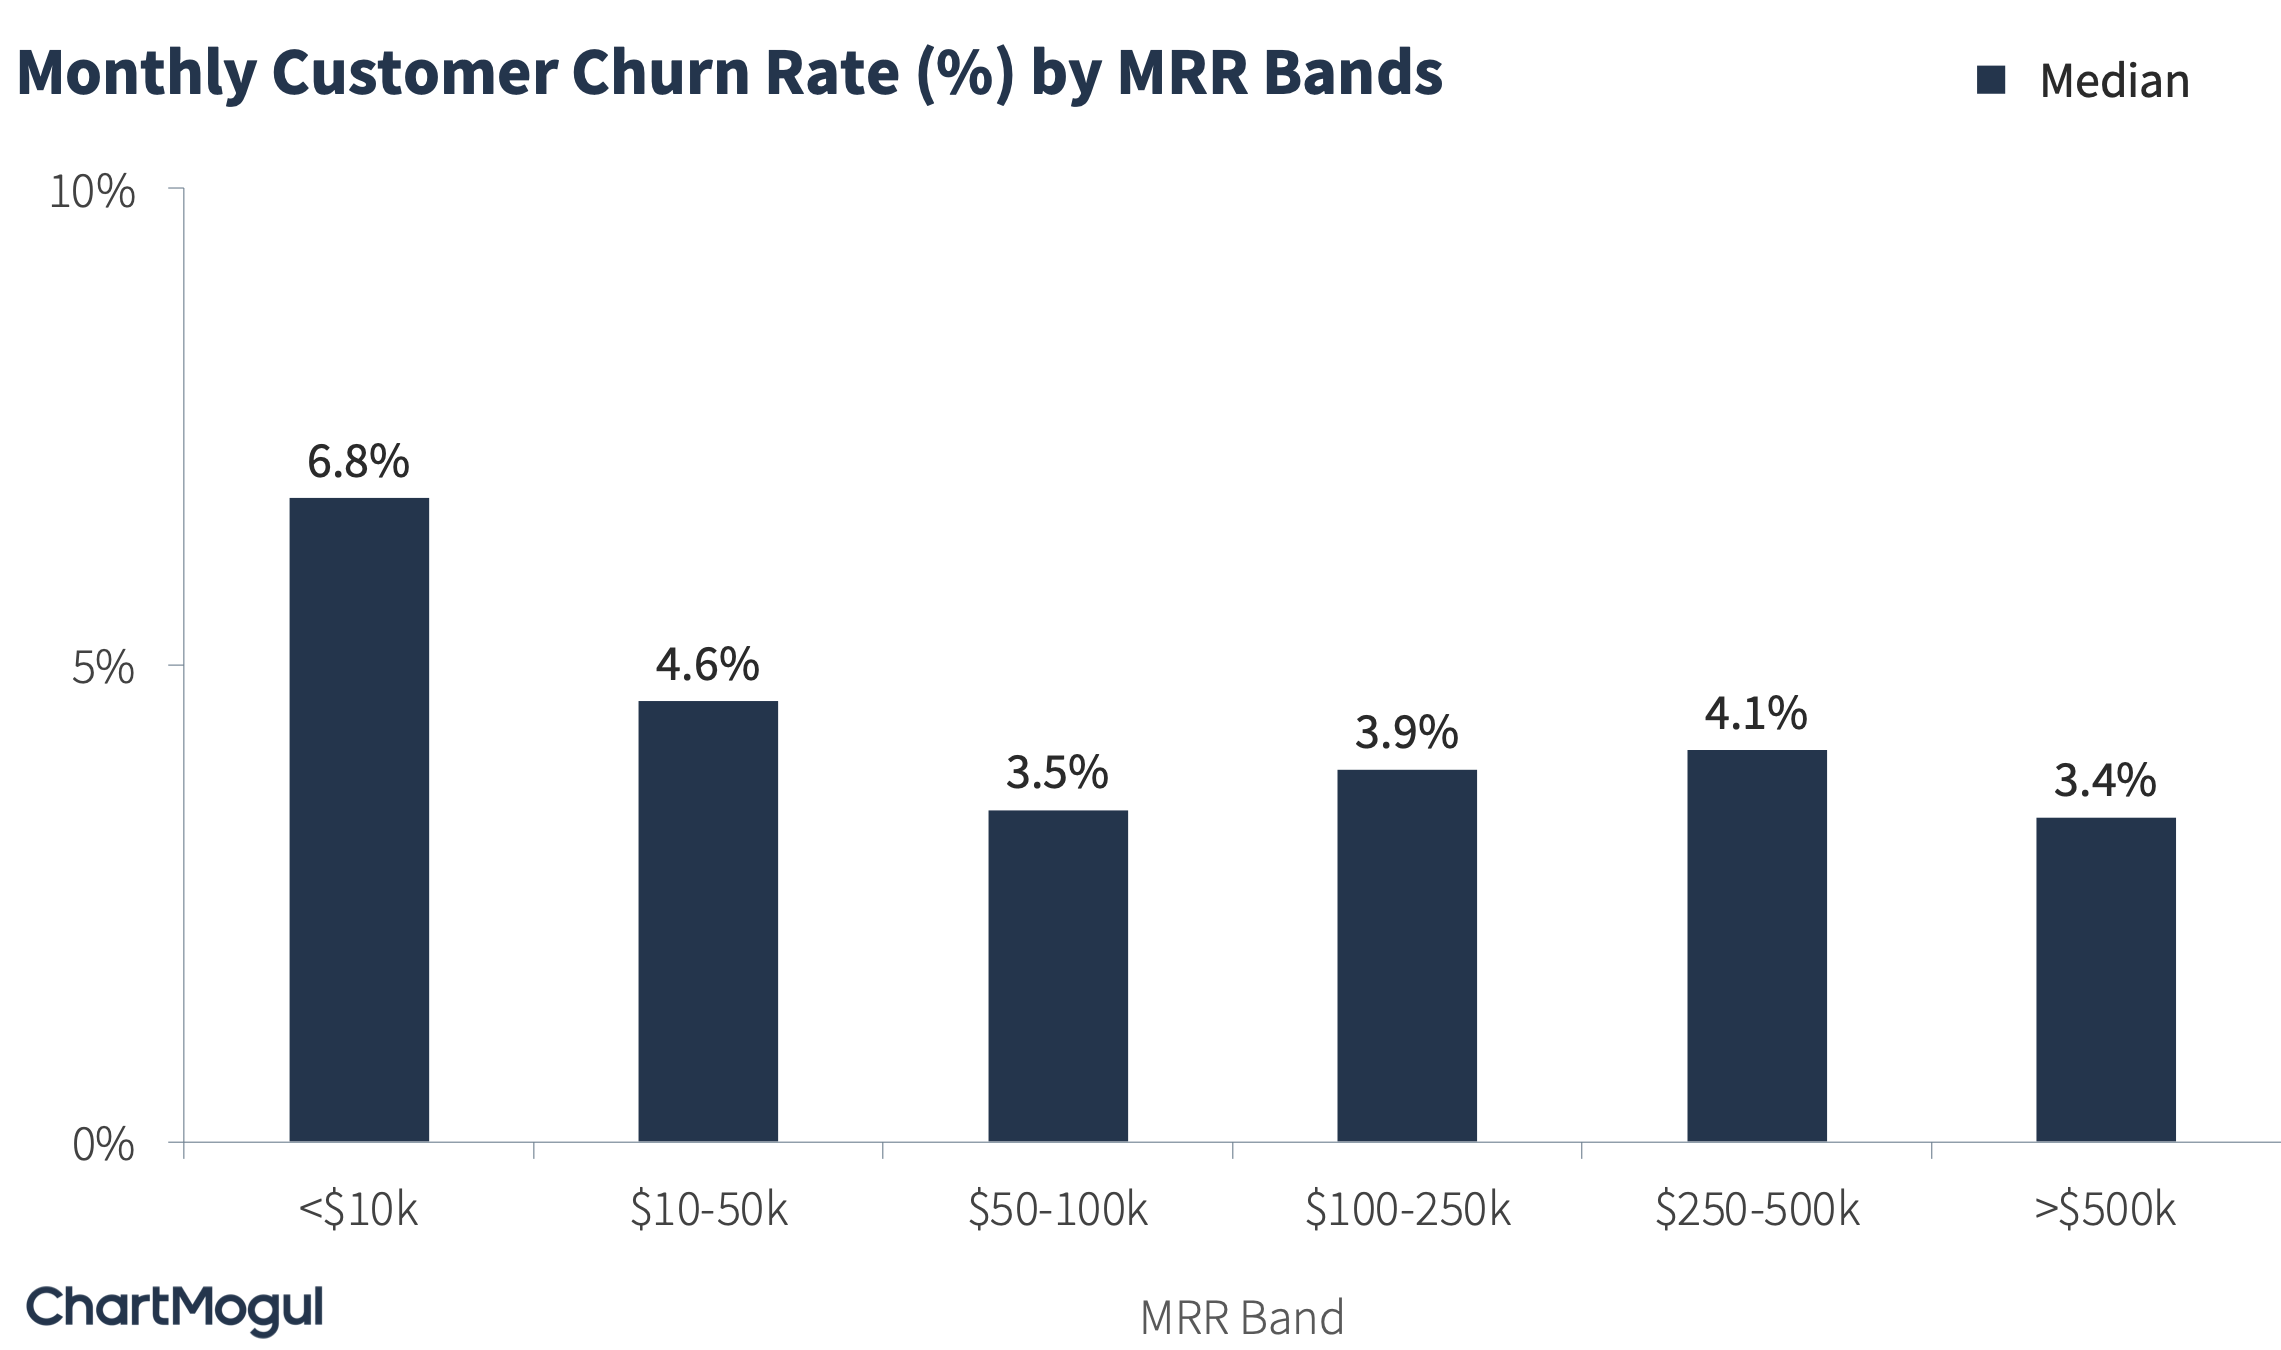 Median Monthly Customer Churn Rate by MRR Band